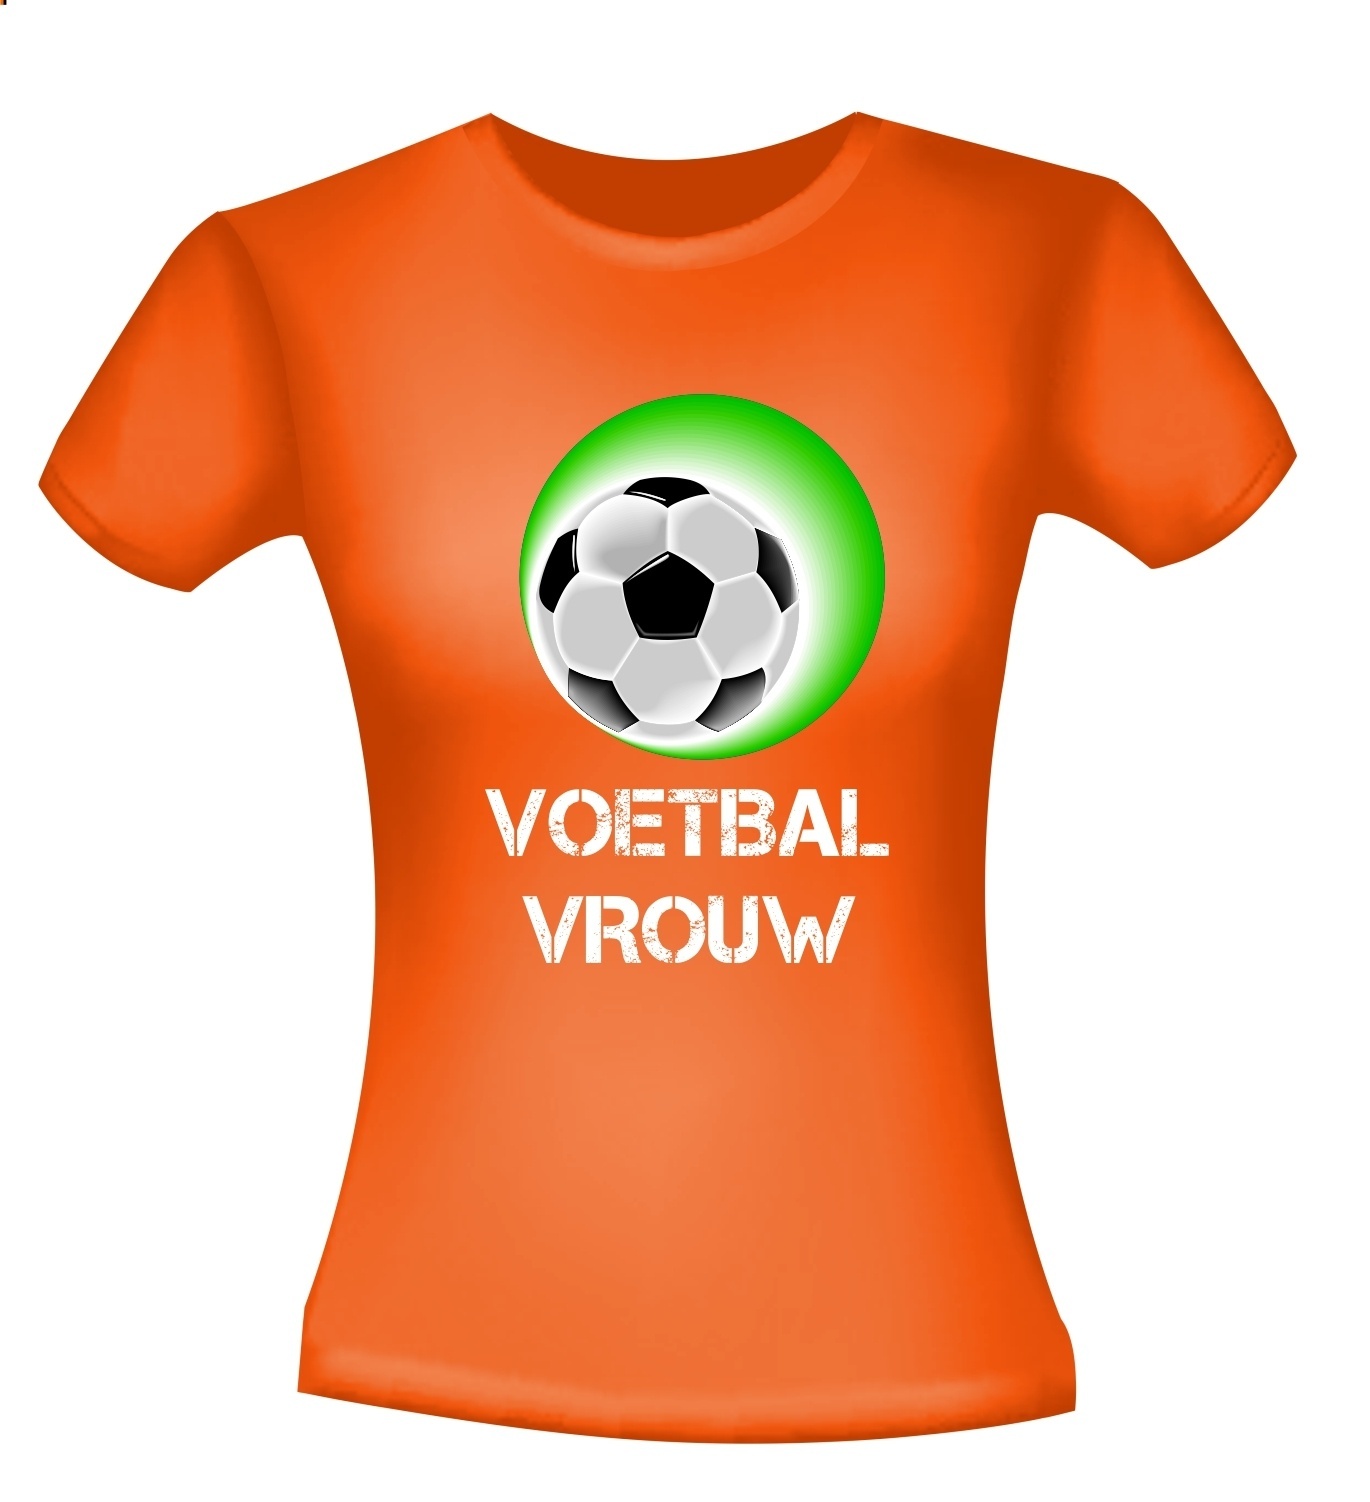  T-shirt Voetbal vrouw